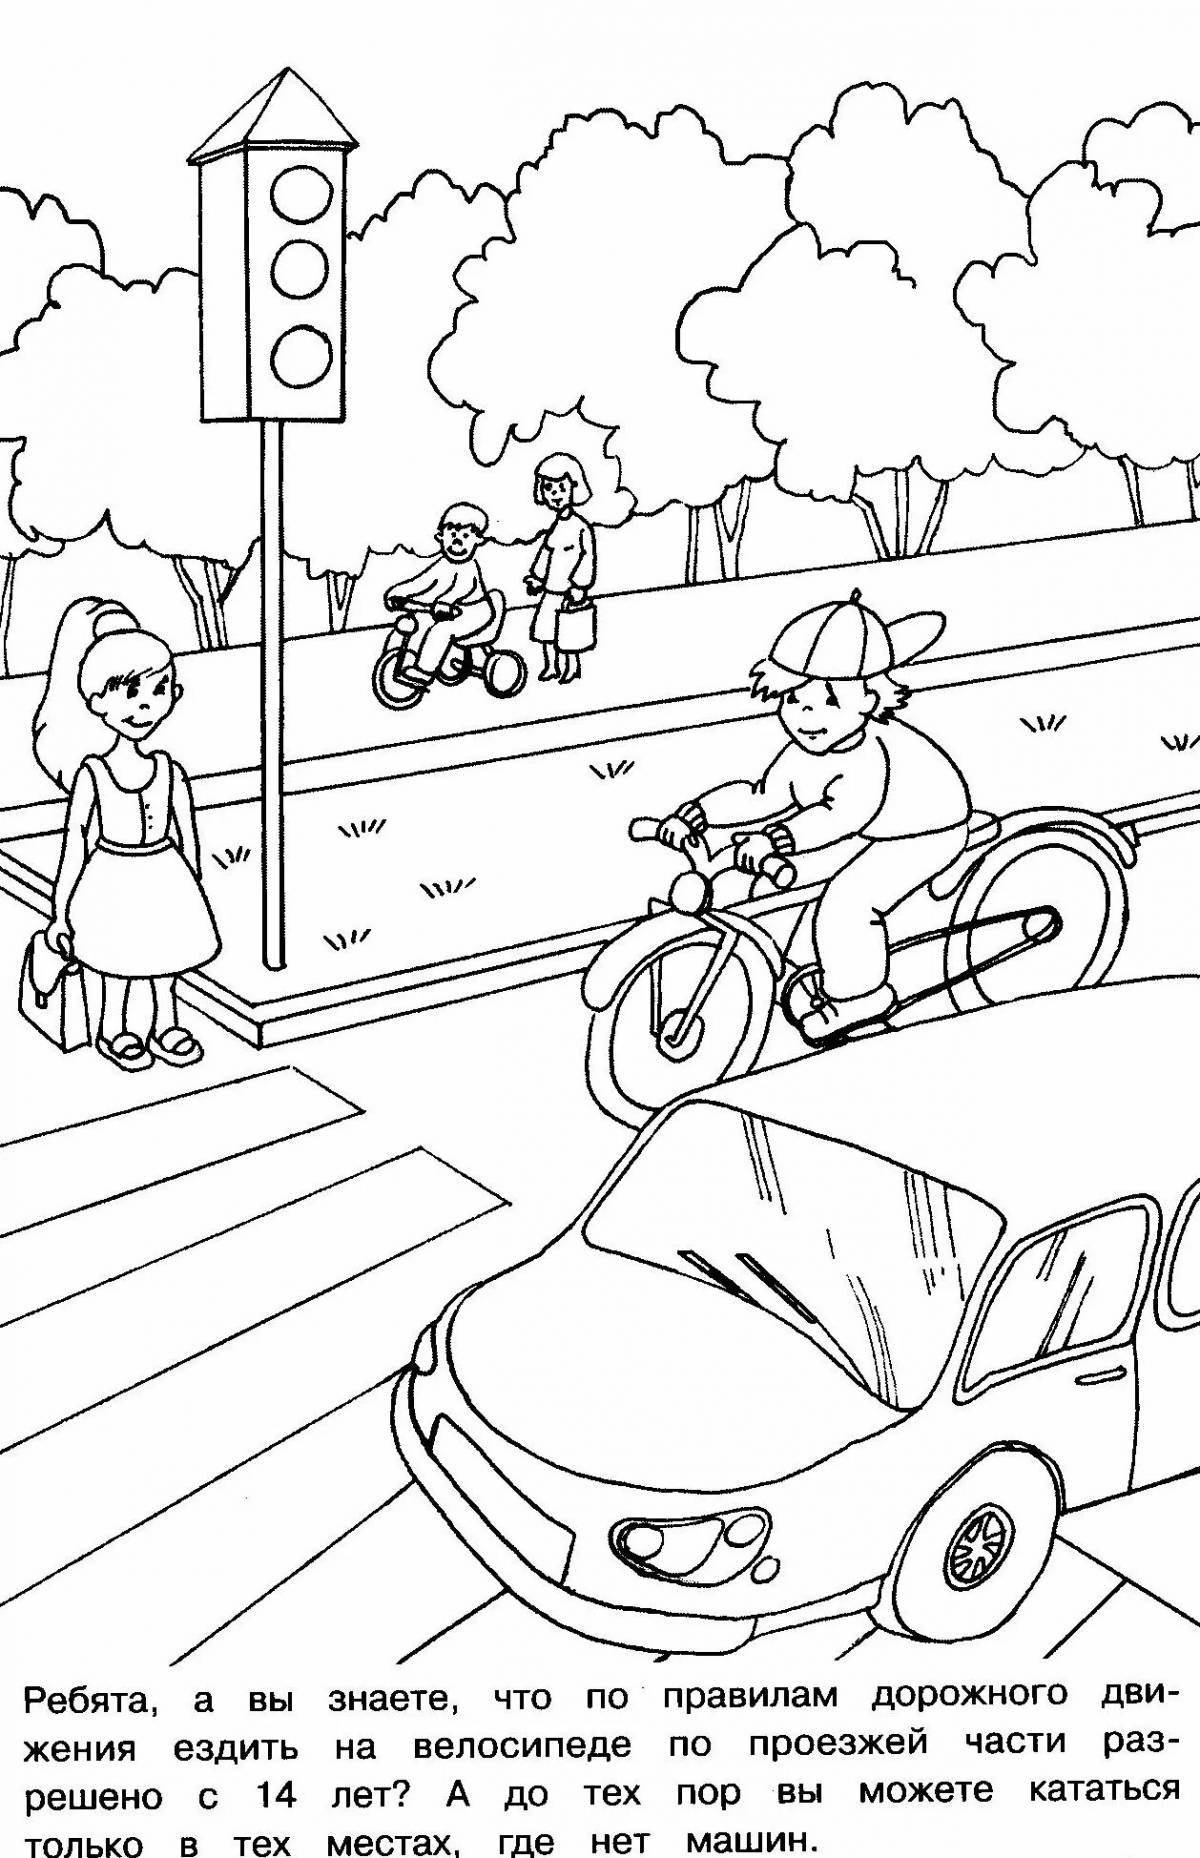 Exciting road home coloring page